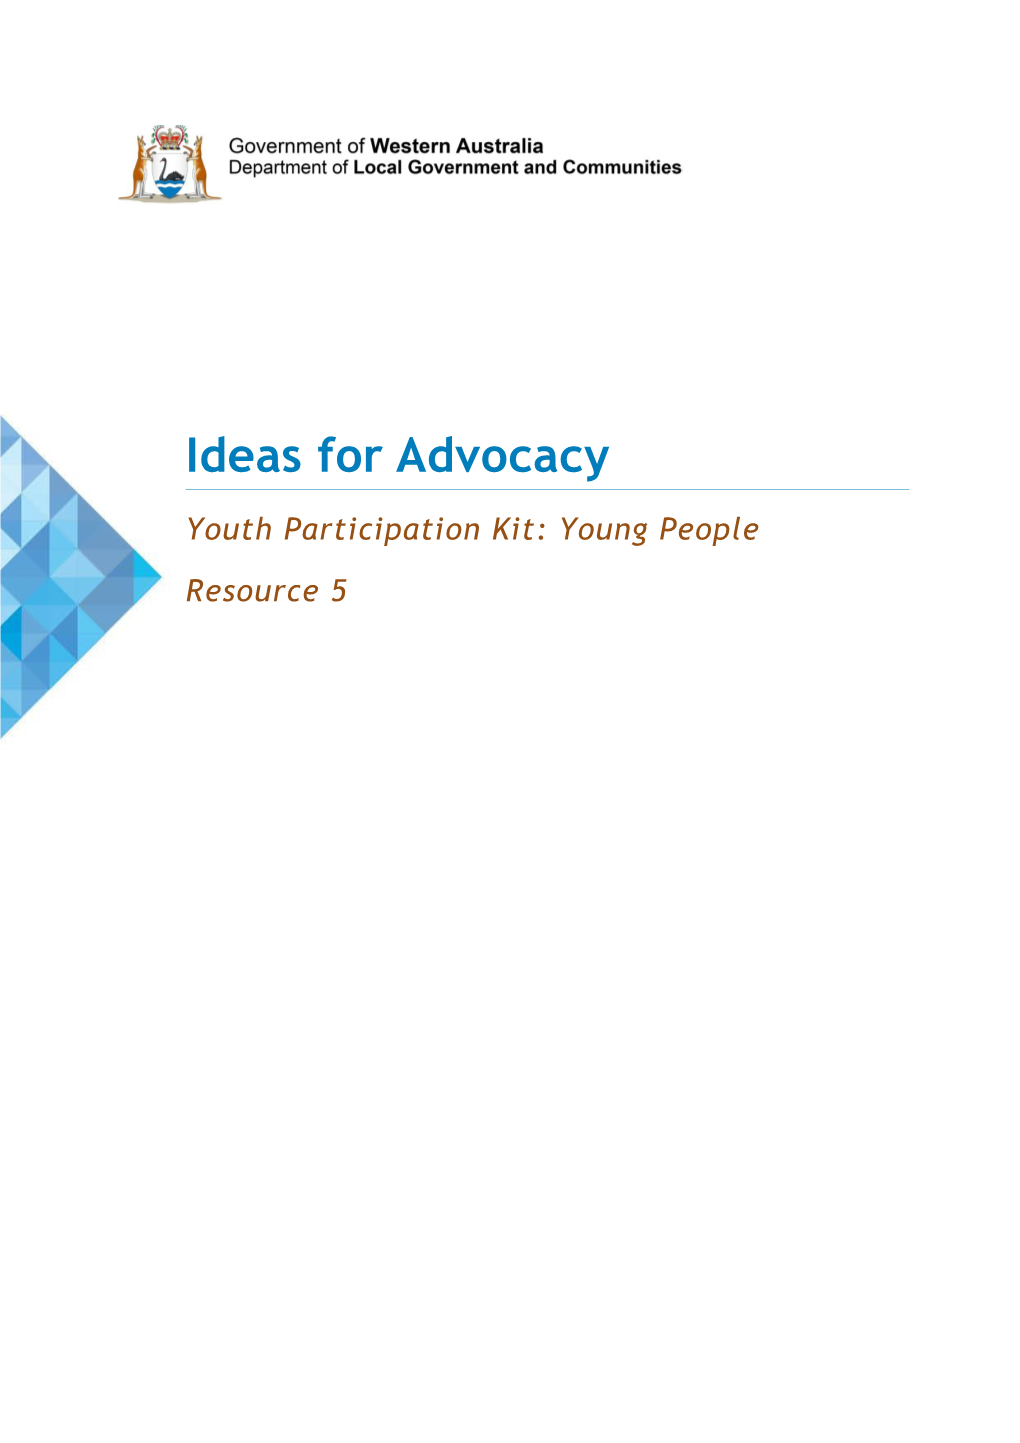 Youth Participation Kit: Young People - Resource 5 - Ideas for Advocacy